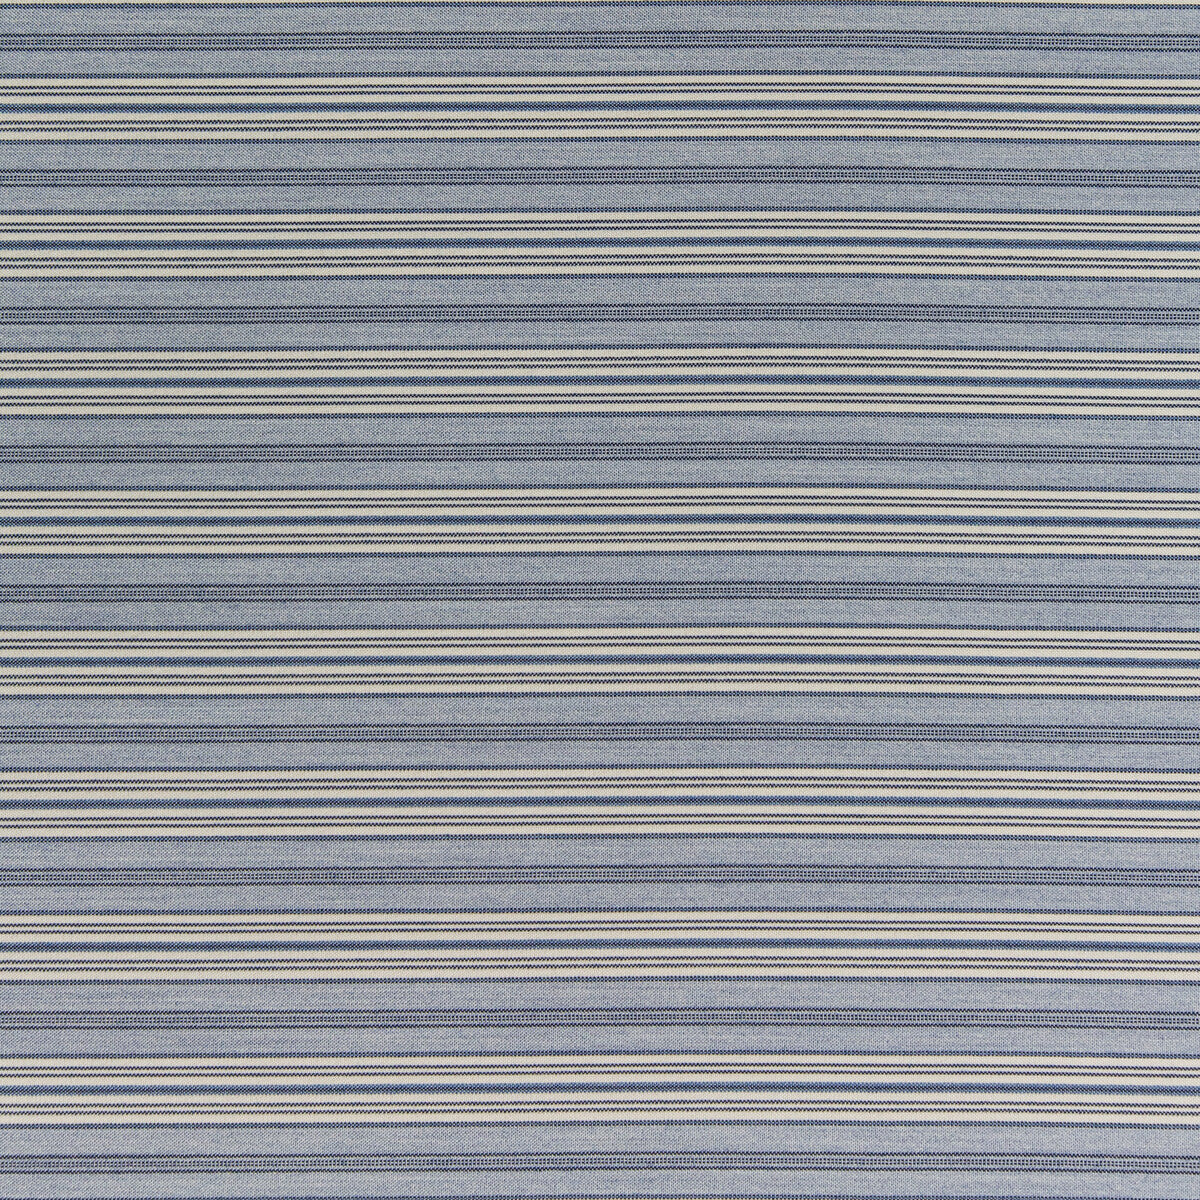 Hull Stripe fabric in chambray color - pattern 35827.5.0 - by Kravet Design in the Indoor / Outdoor collection